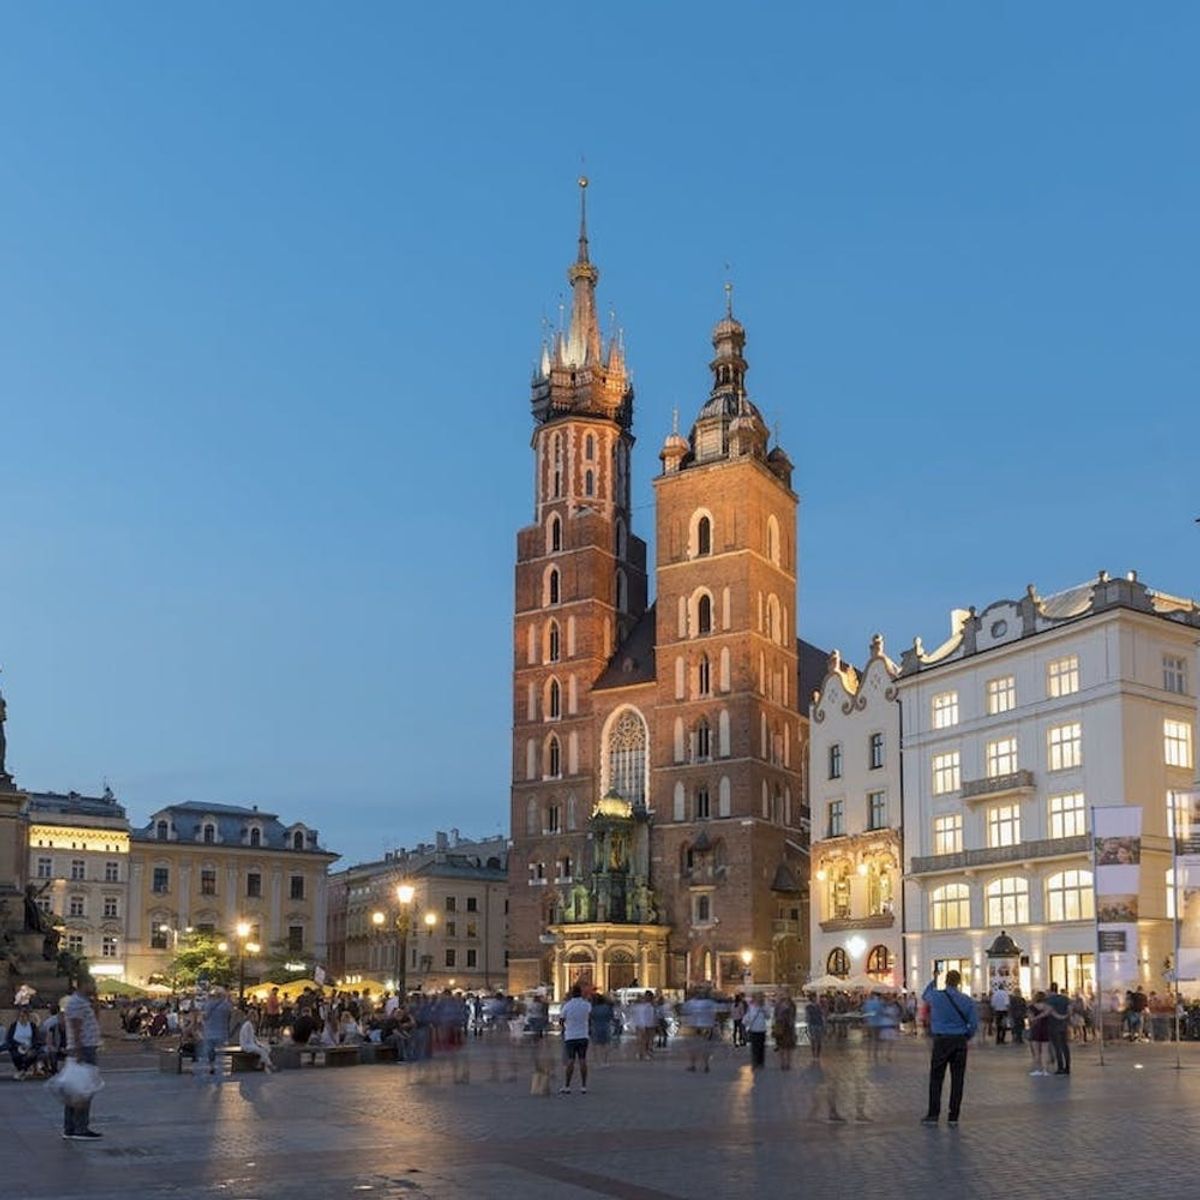 5 Reasons Why Kraków, Poland Is the 2019 Destination You Should Add to Your List